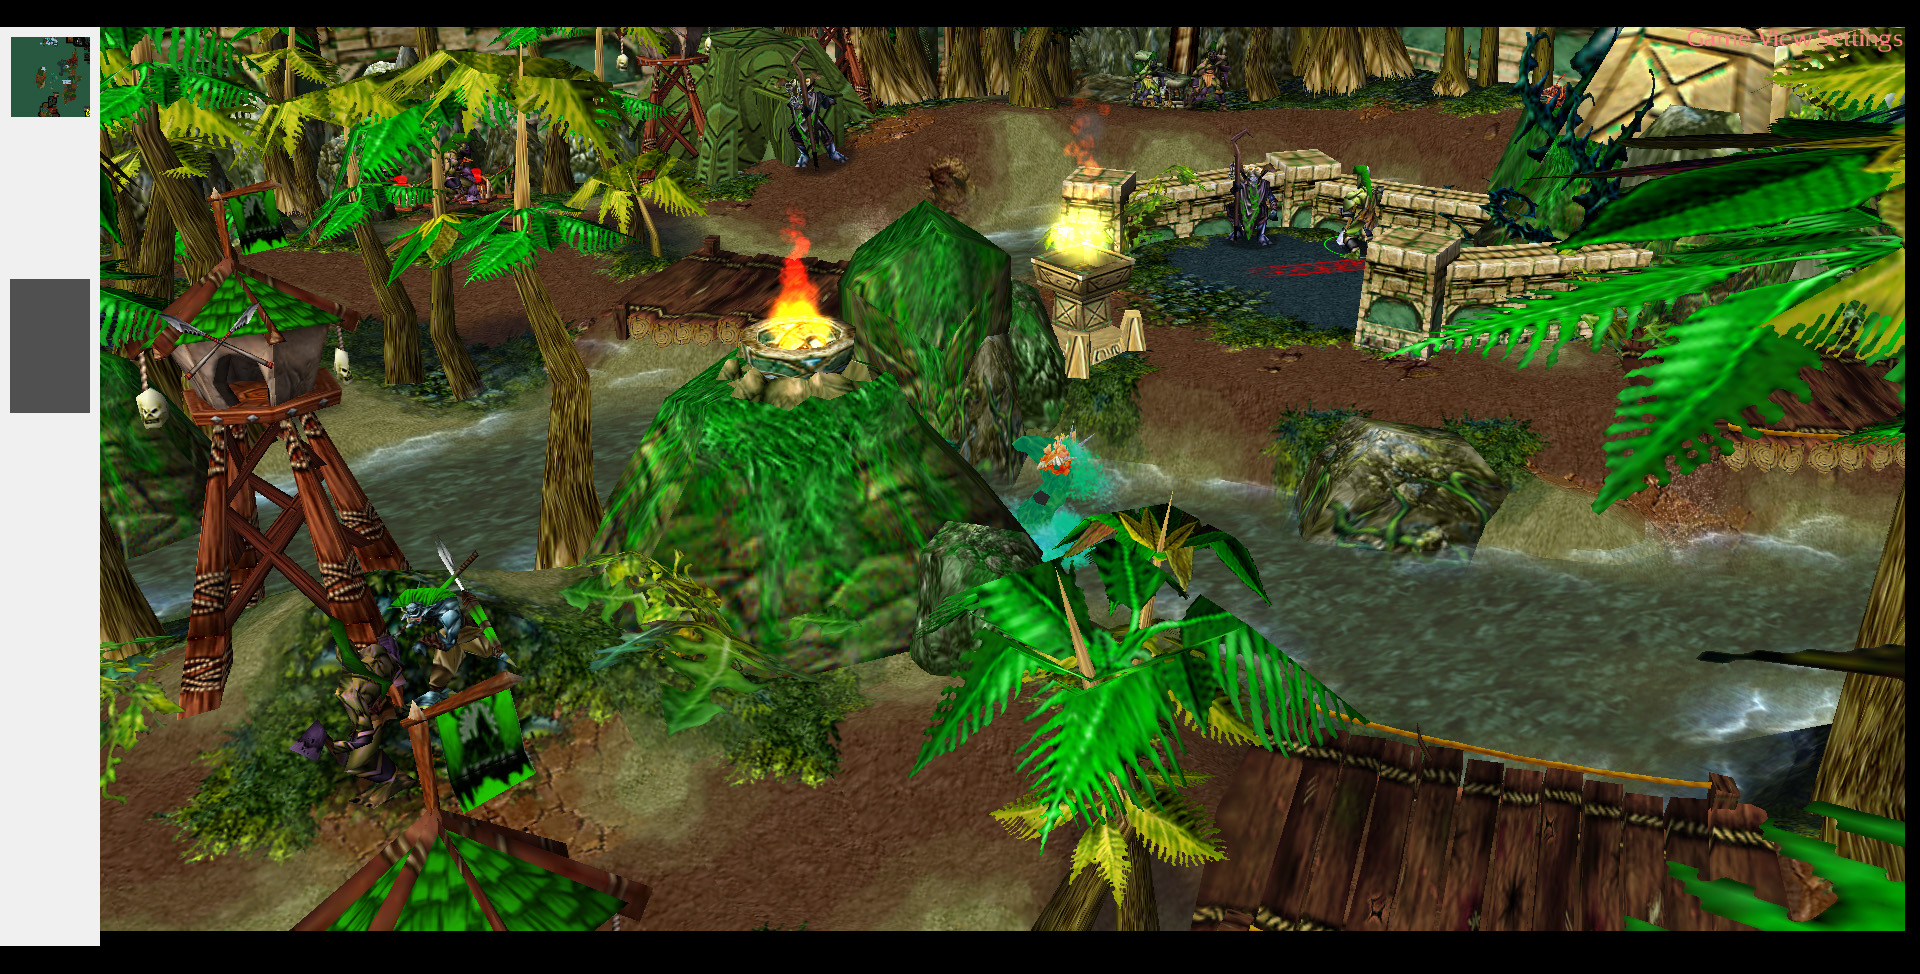 Zul'Gurub! This terrain was crafted by Amargaard. Props to him!